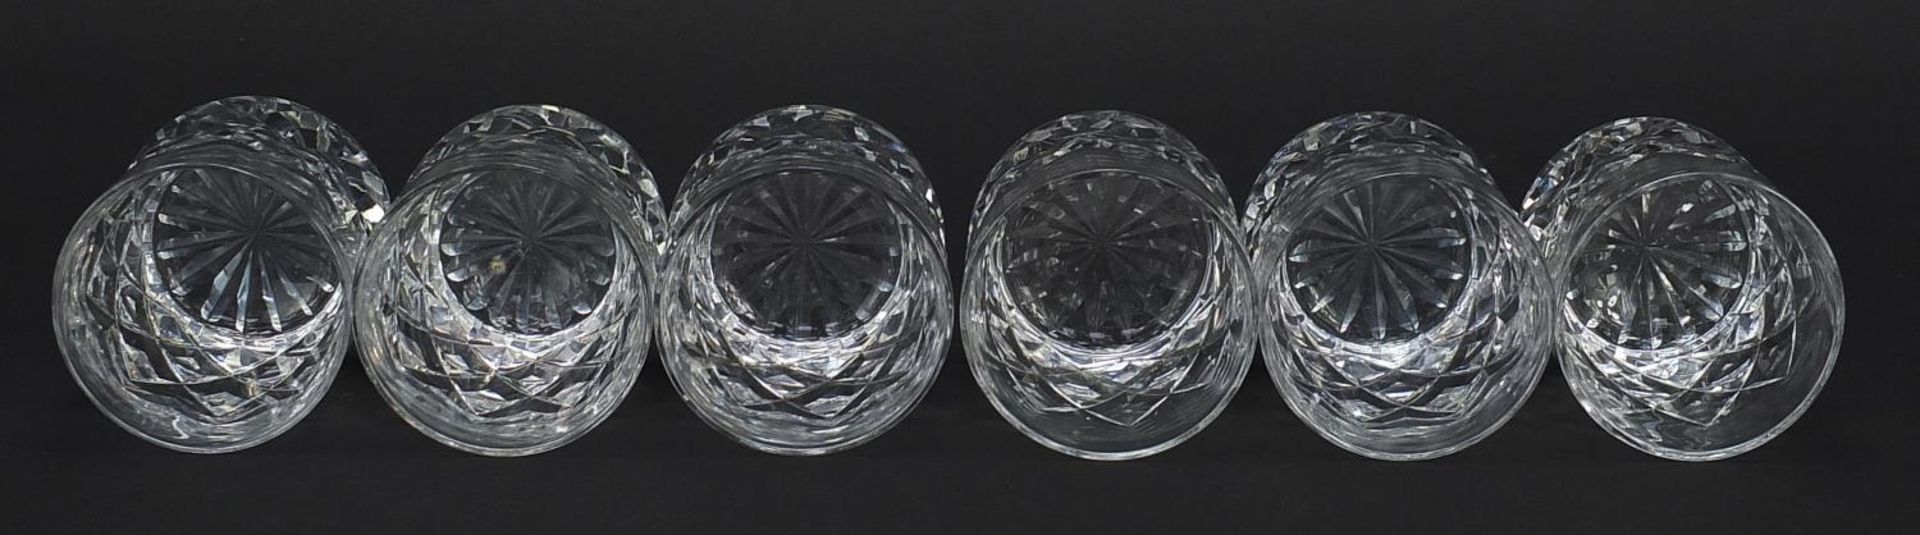 Six lead crystal whiskey tumblers, 8cm high - Image 5 of 6